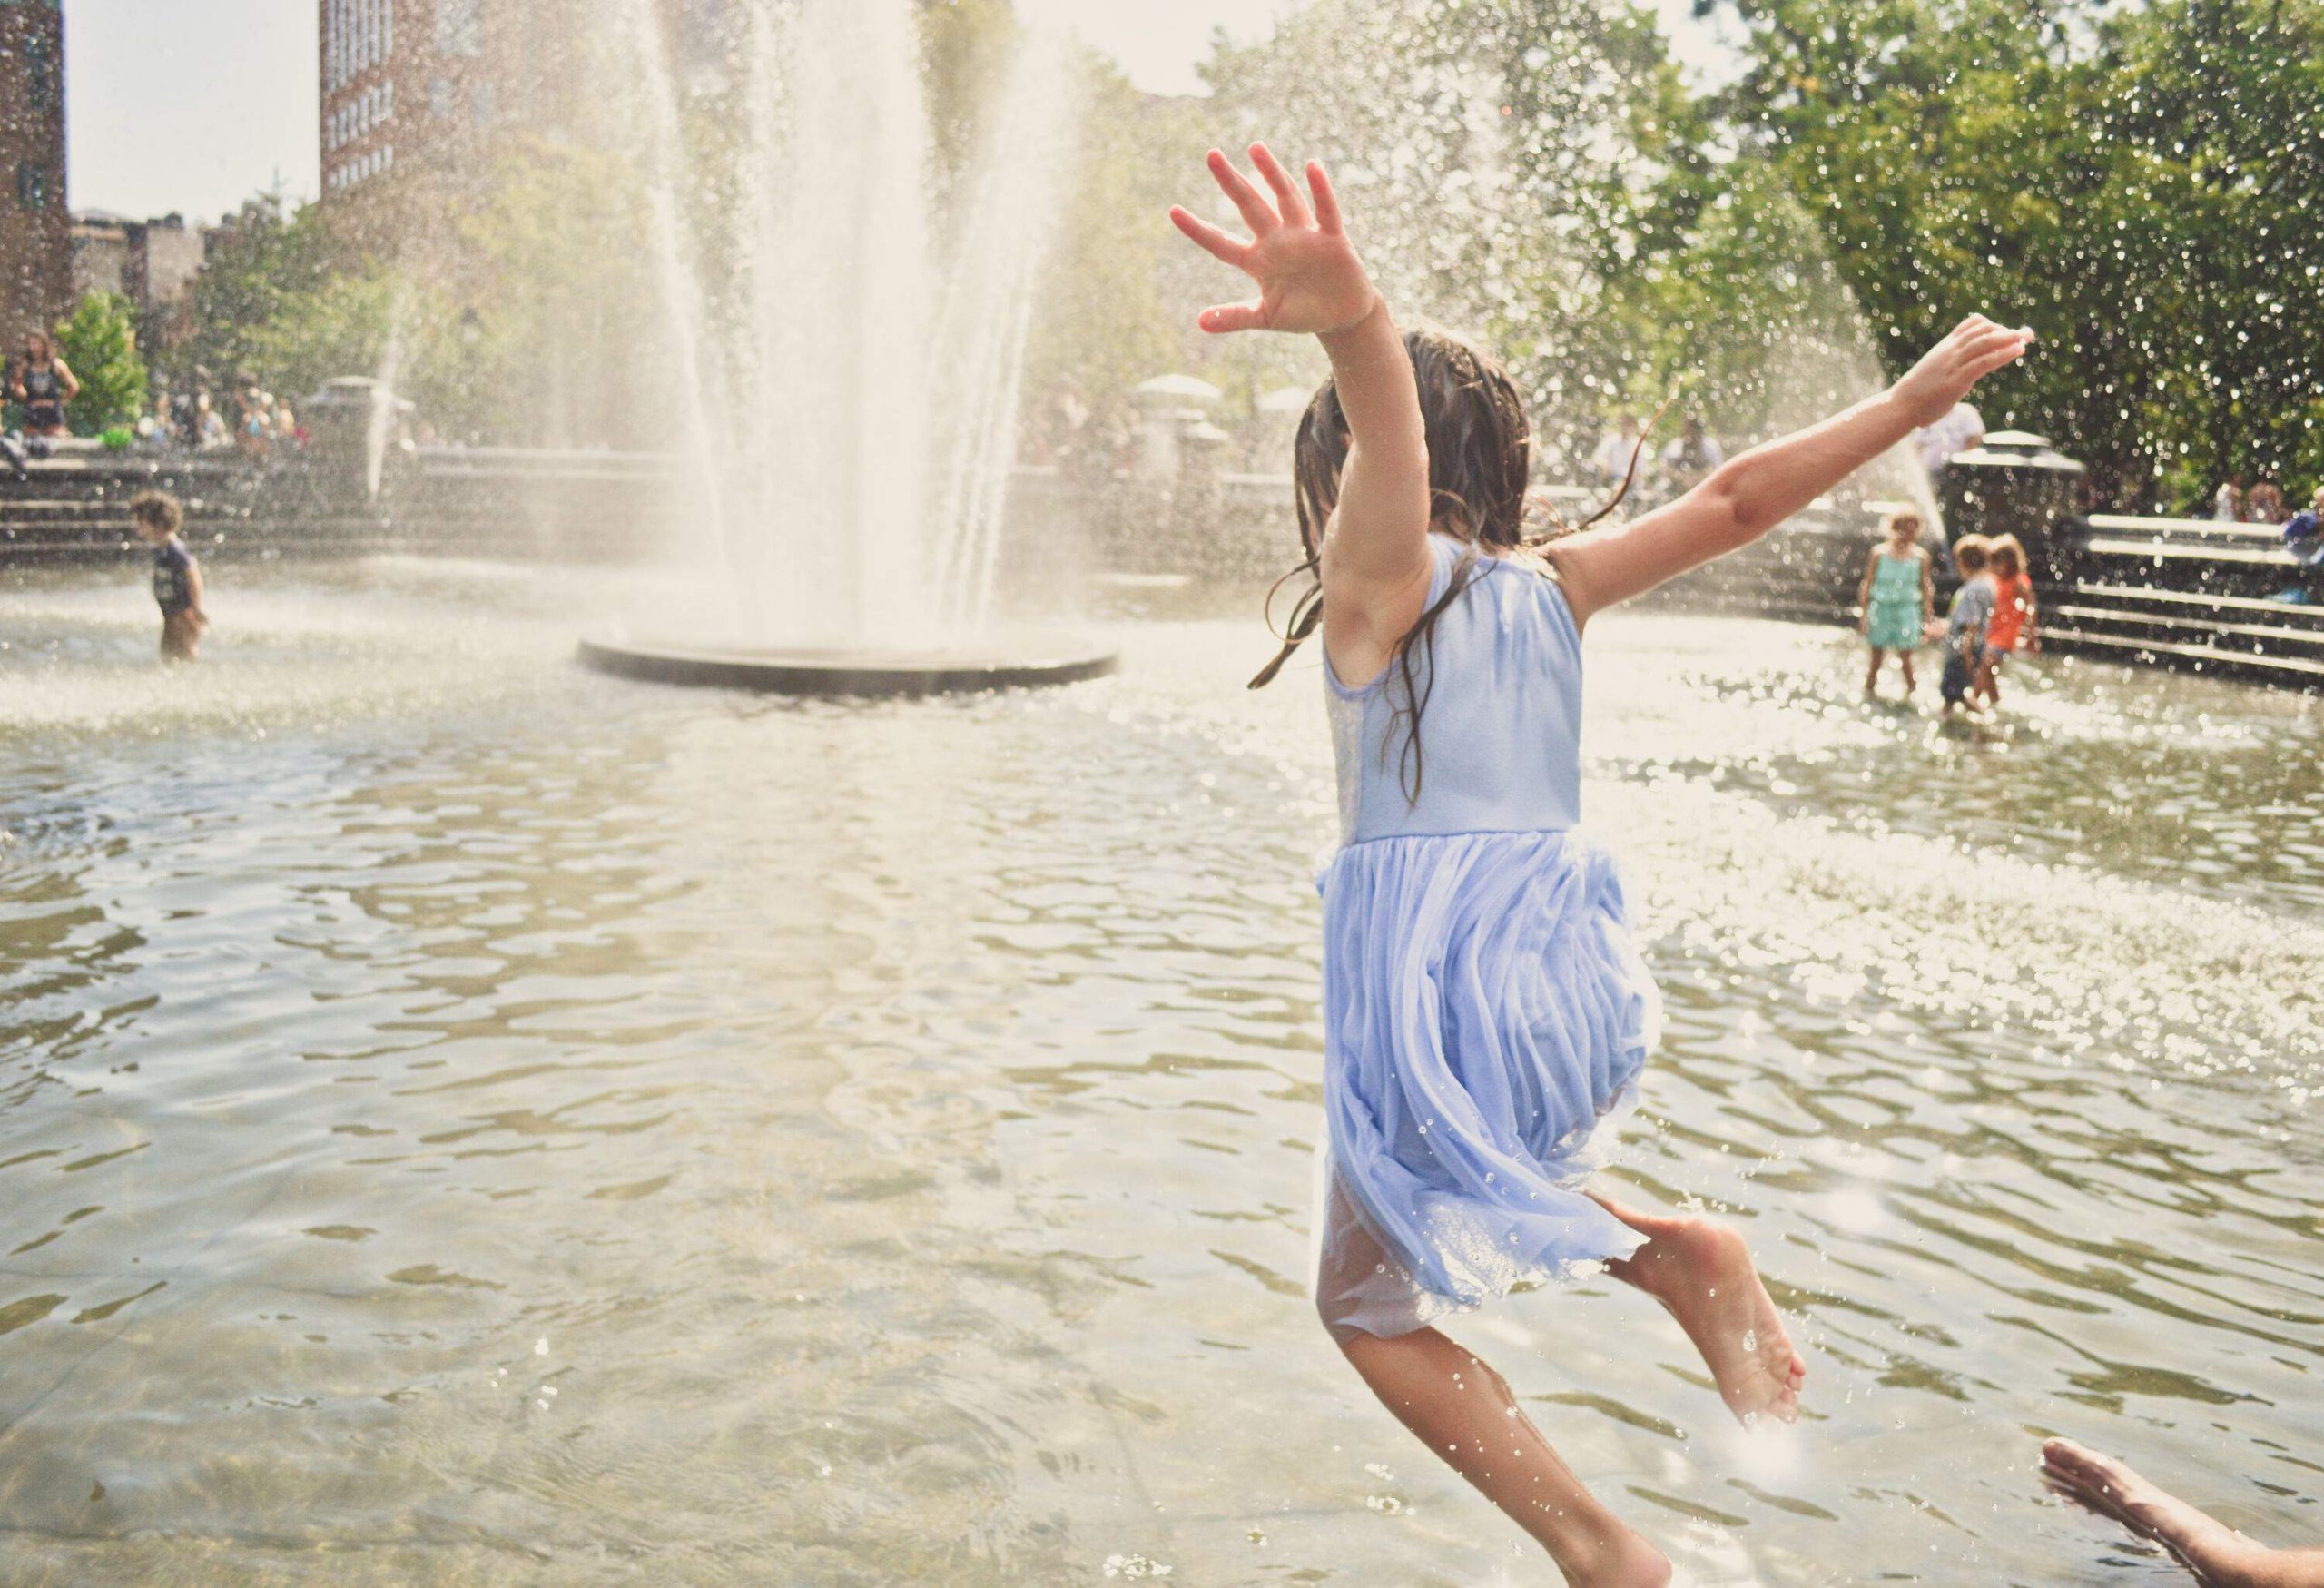 A young girl jumps into the water at a fountain on a hot summer day.